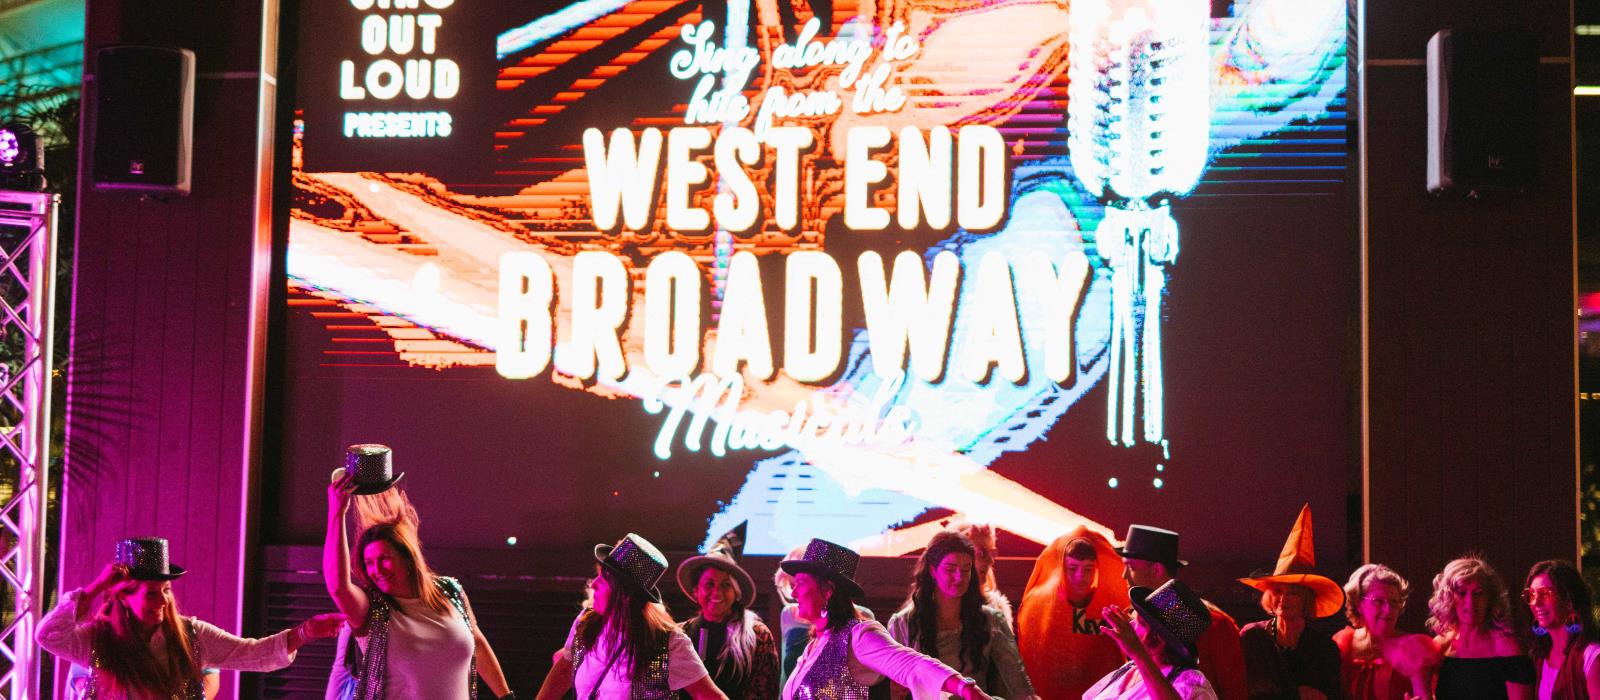 West End Vs Broadway Musical Hits sing-along show